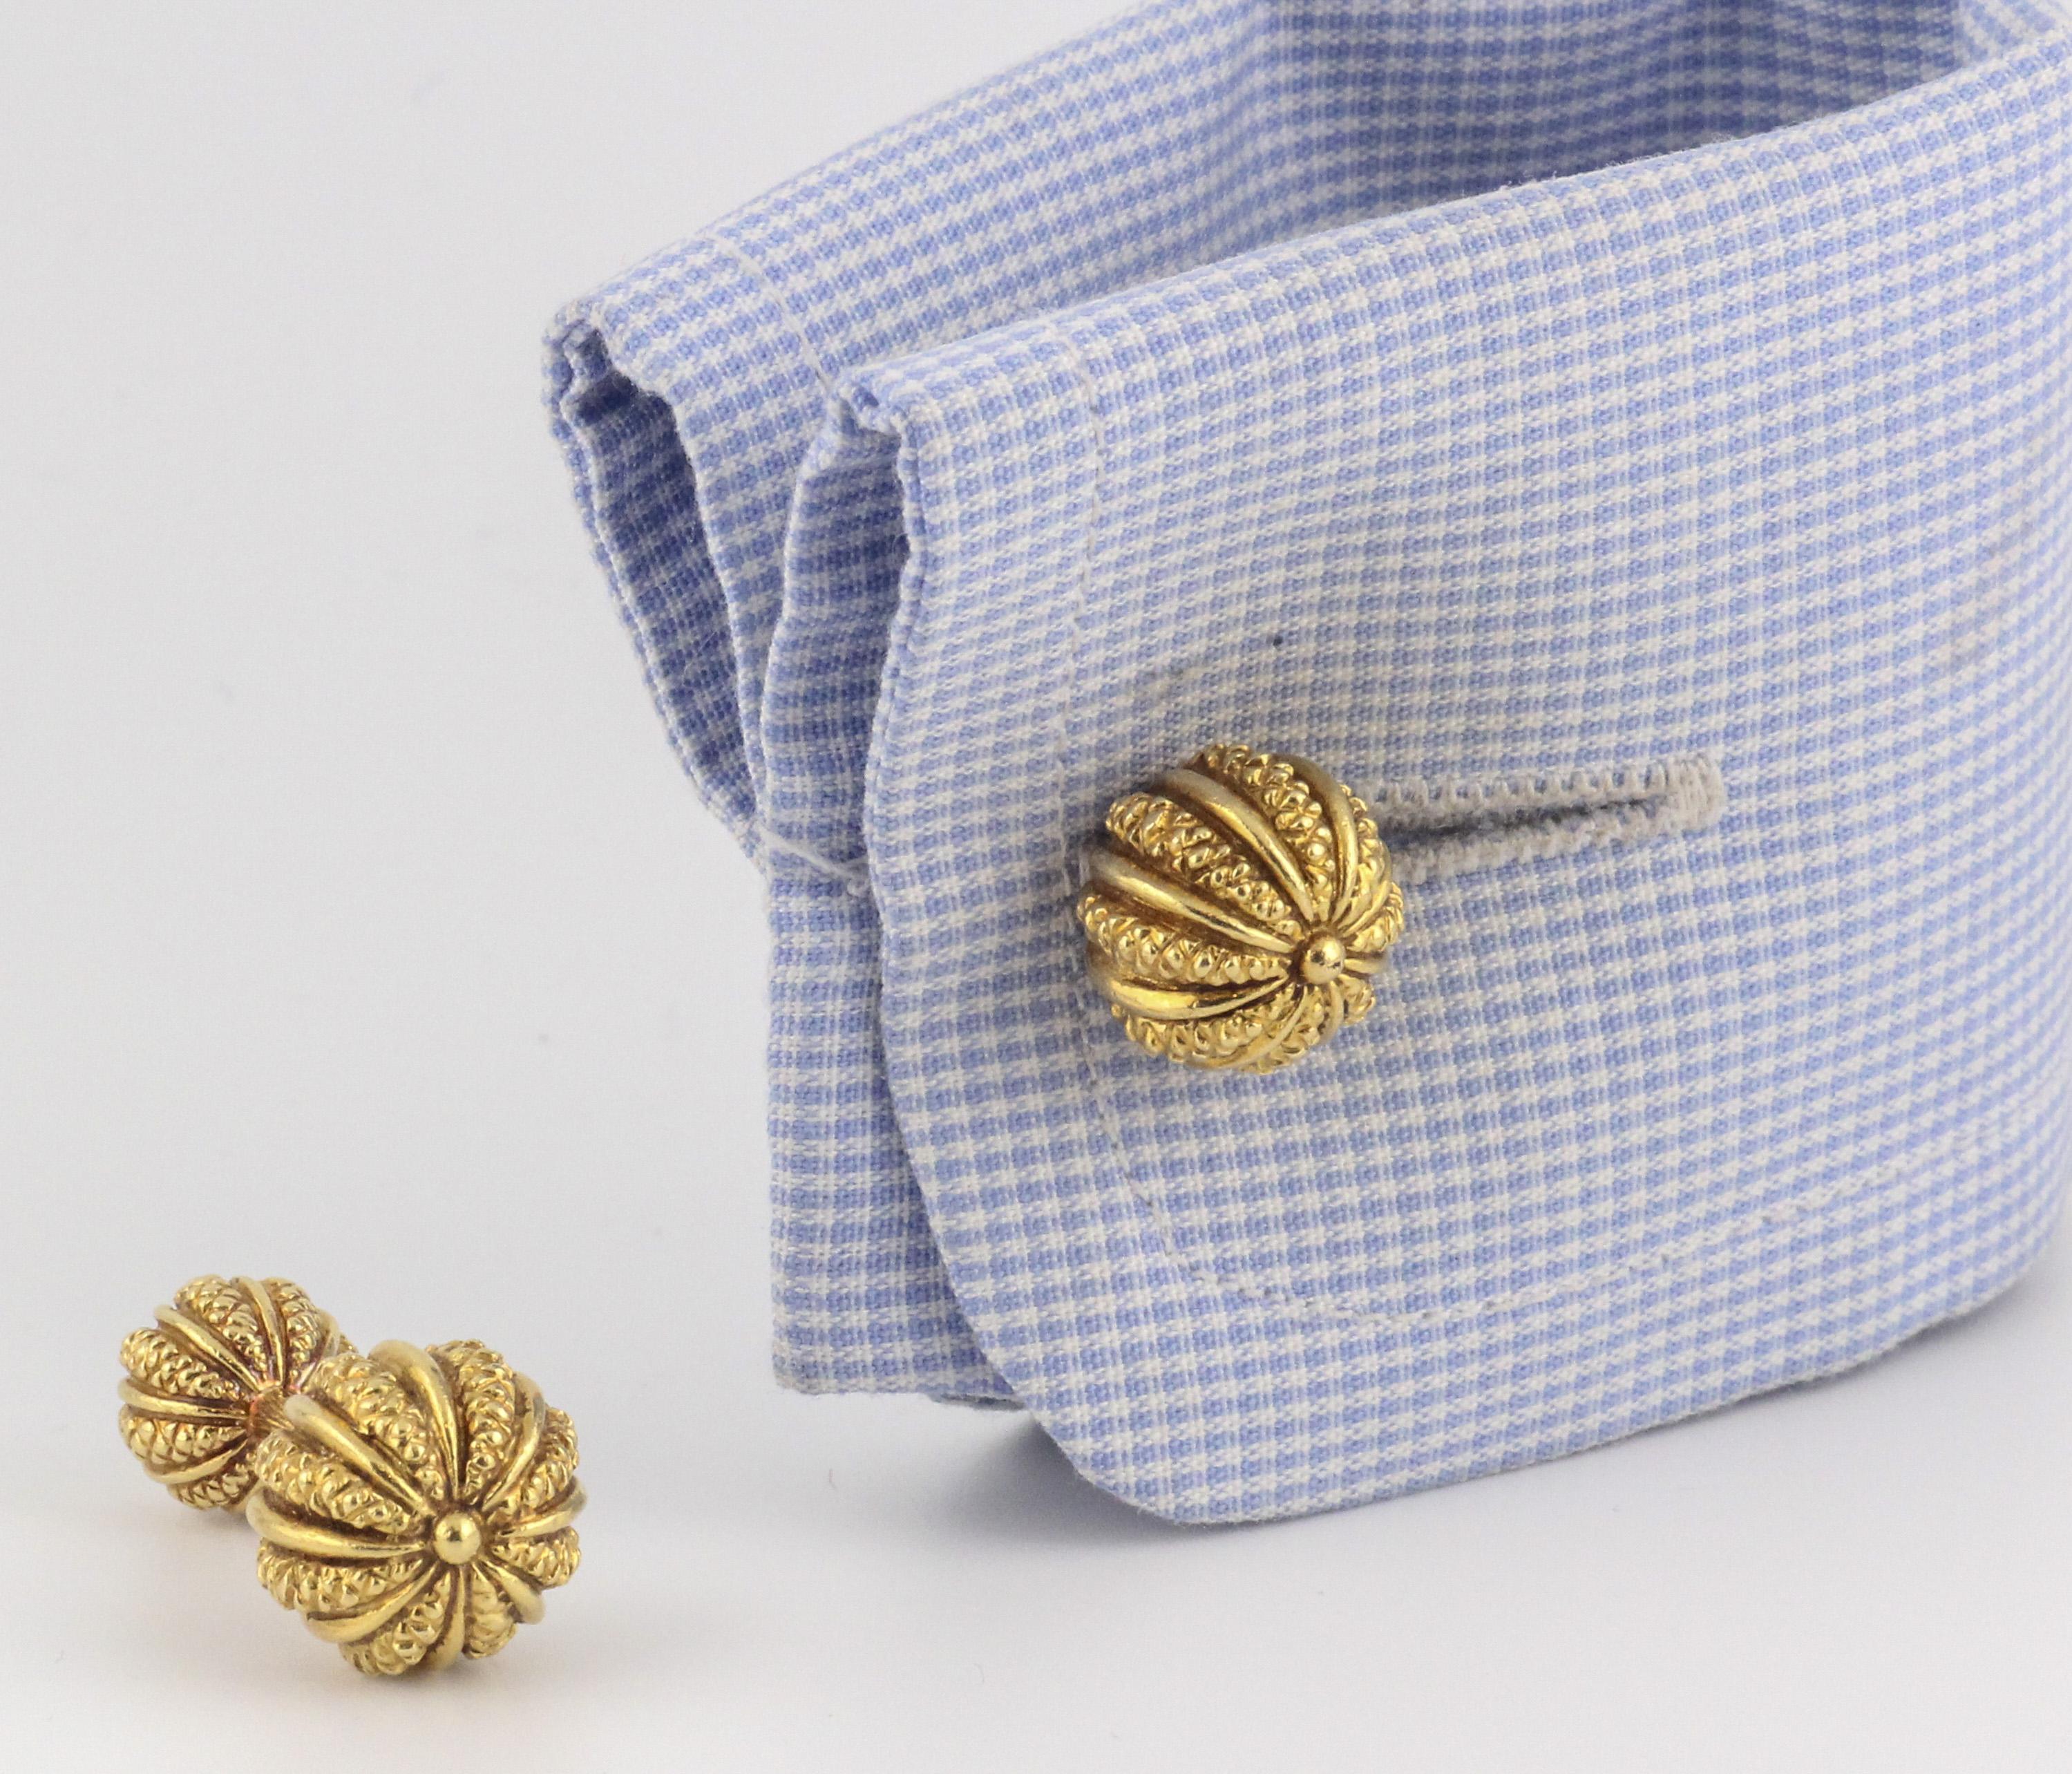 Tiffany & Co. Schlumberger 18k Yellow Gold Seed Dumbbell Cufflinks 1